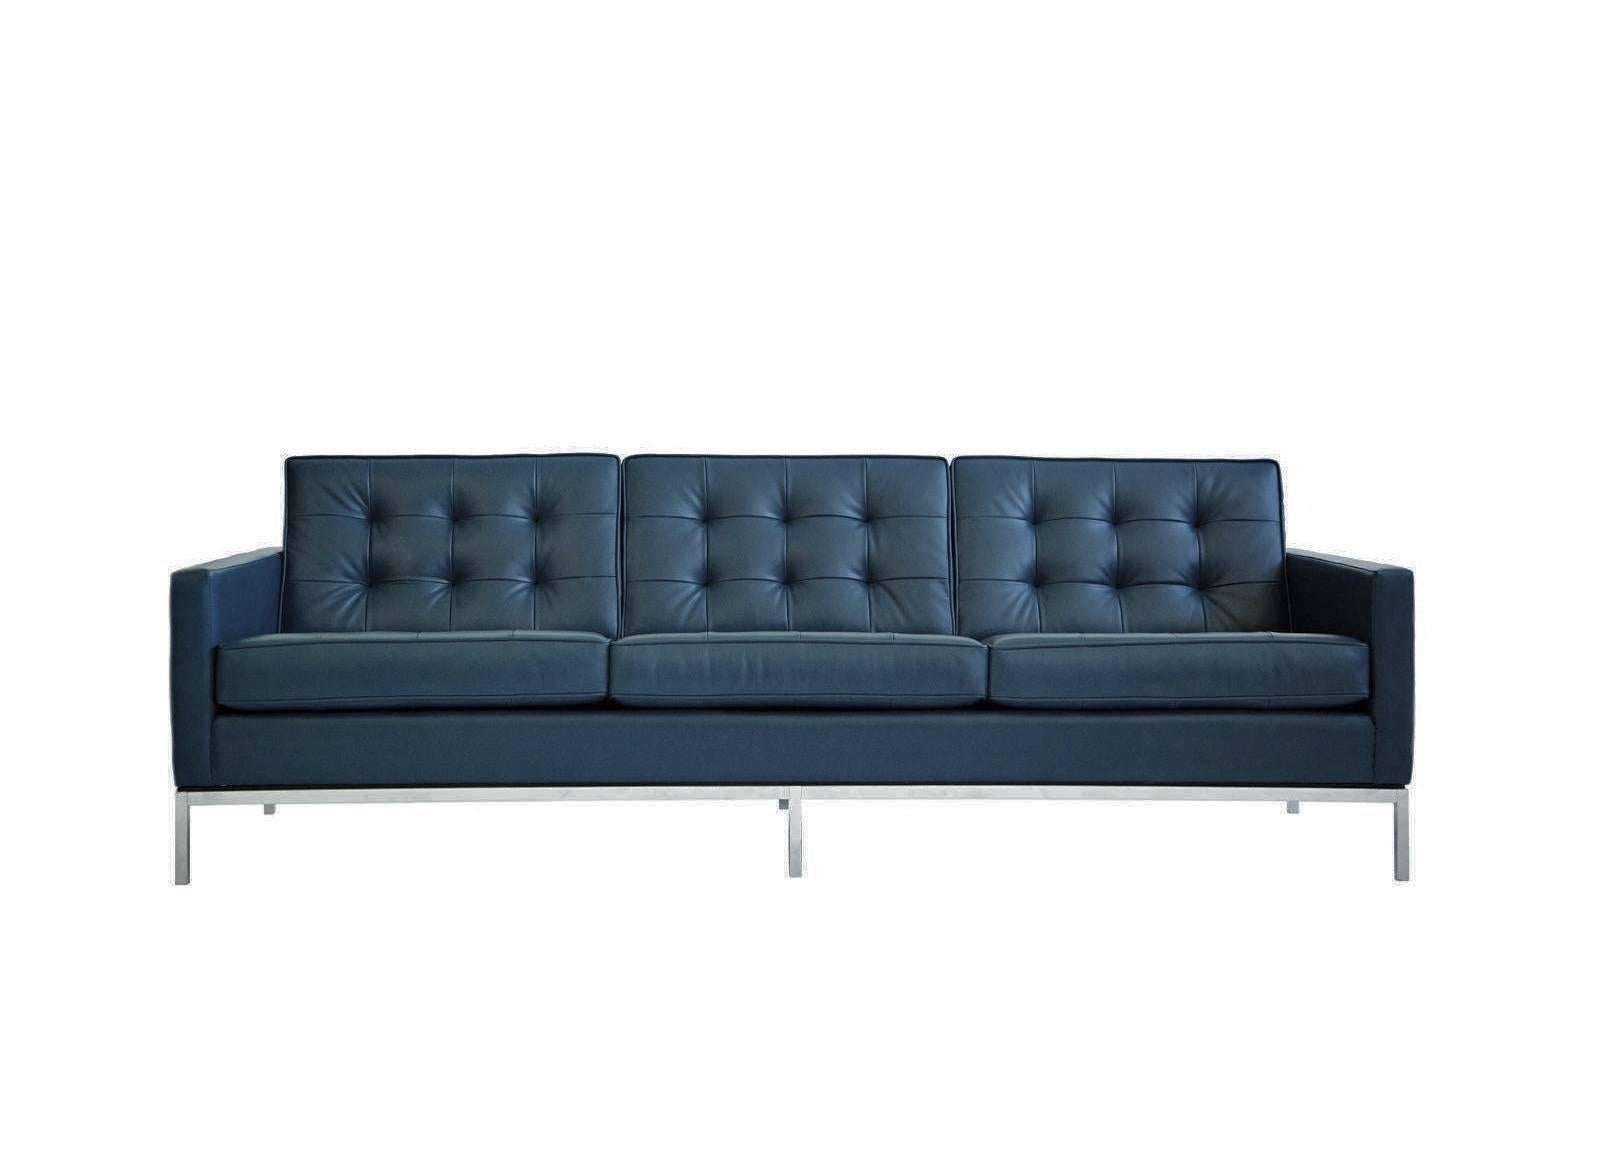 Florence Knoll Leather Sofa In Excellent Condition For Sale In Chicago, IL